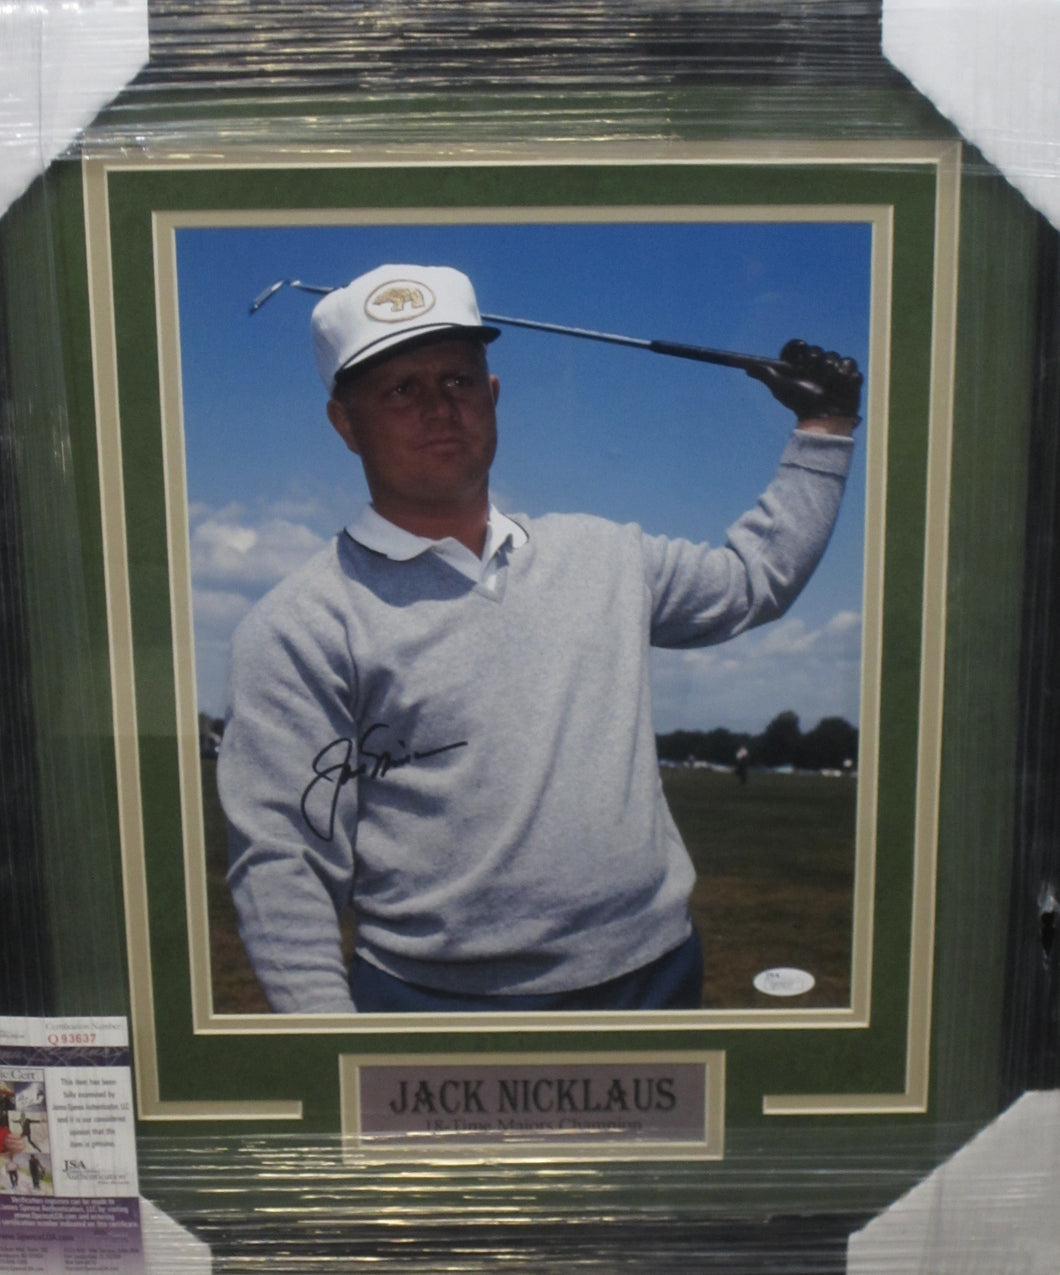 American Golfer Jack Nicklaus Signed 16x20 Photo Framed & Matted with JSA COA